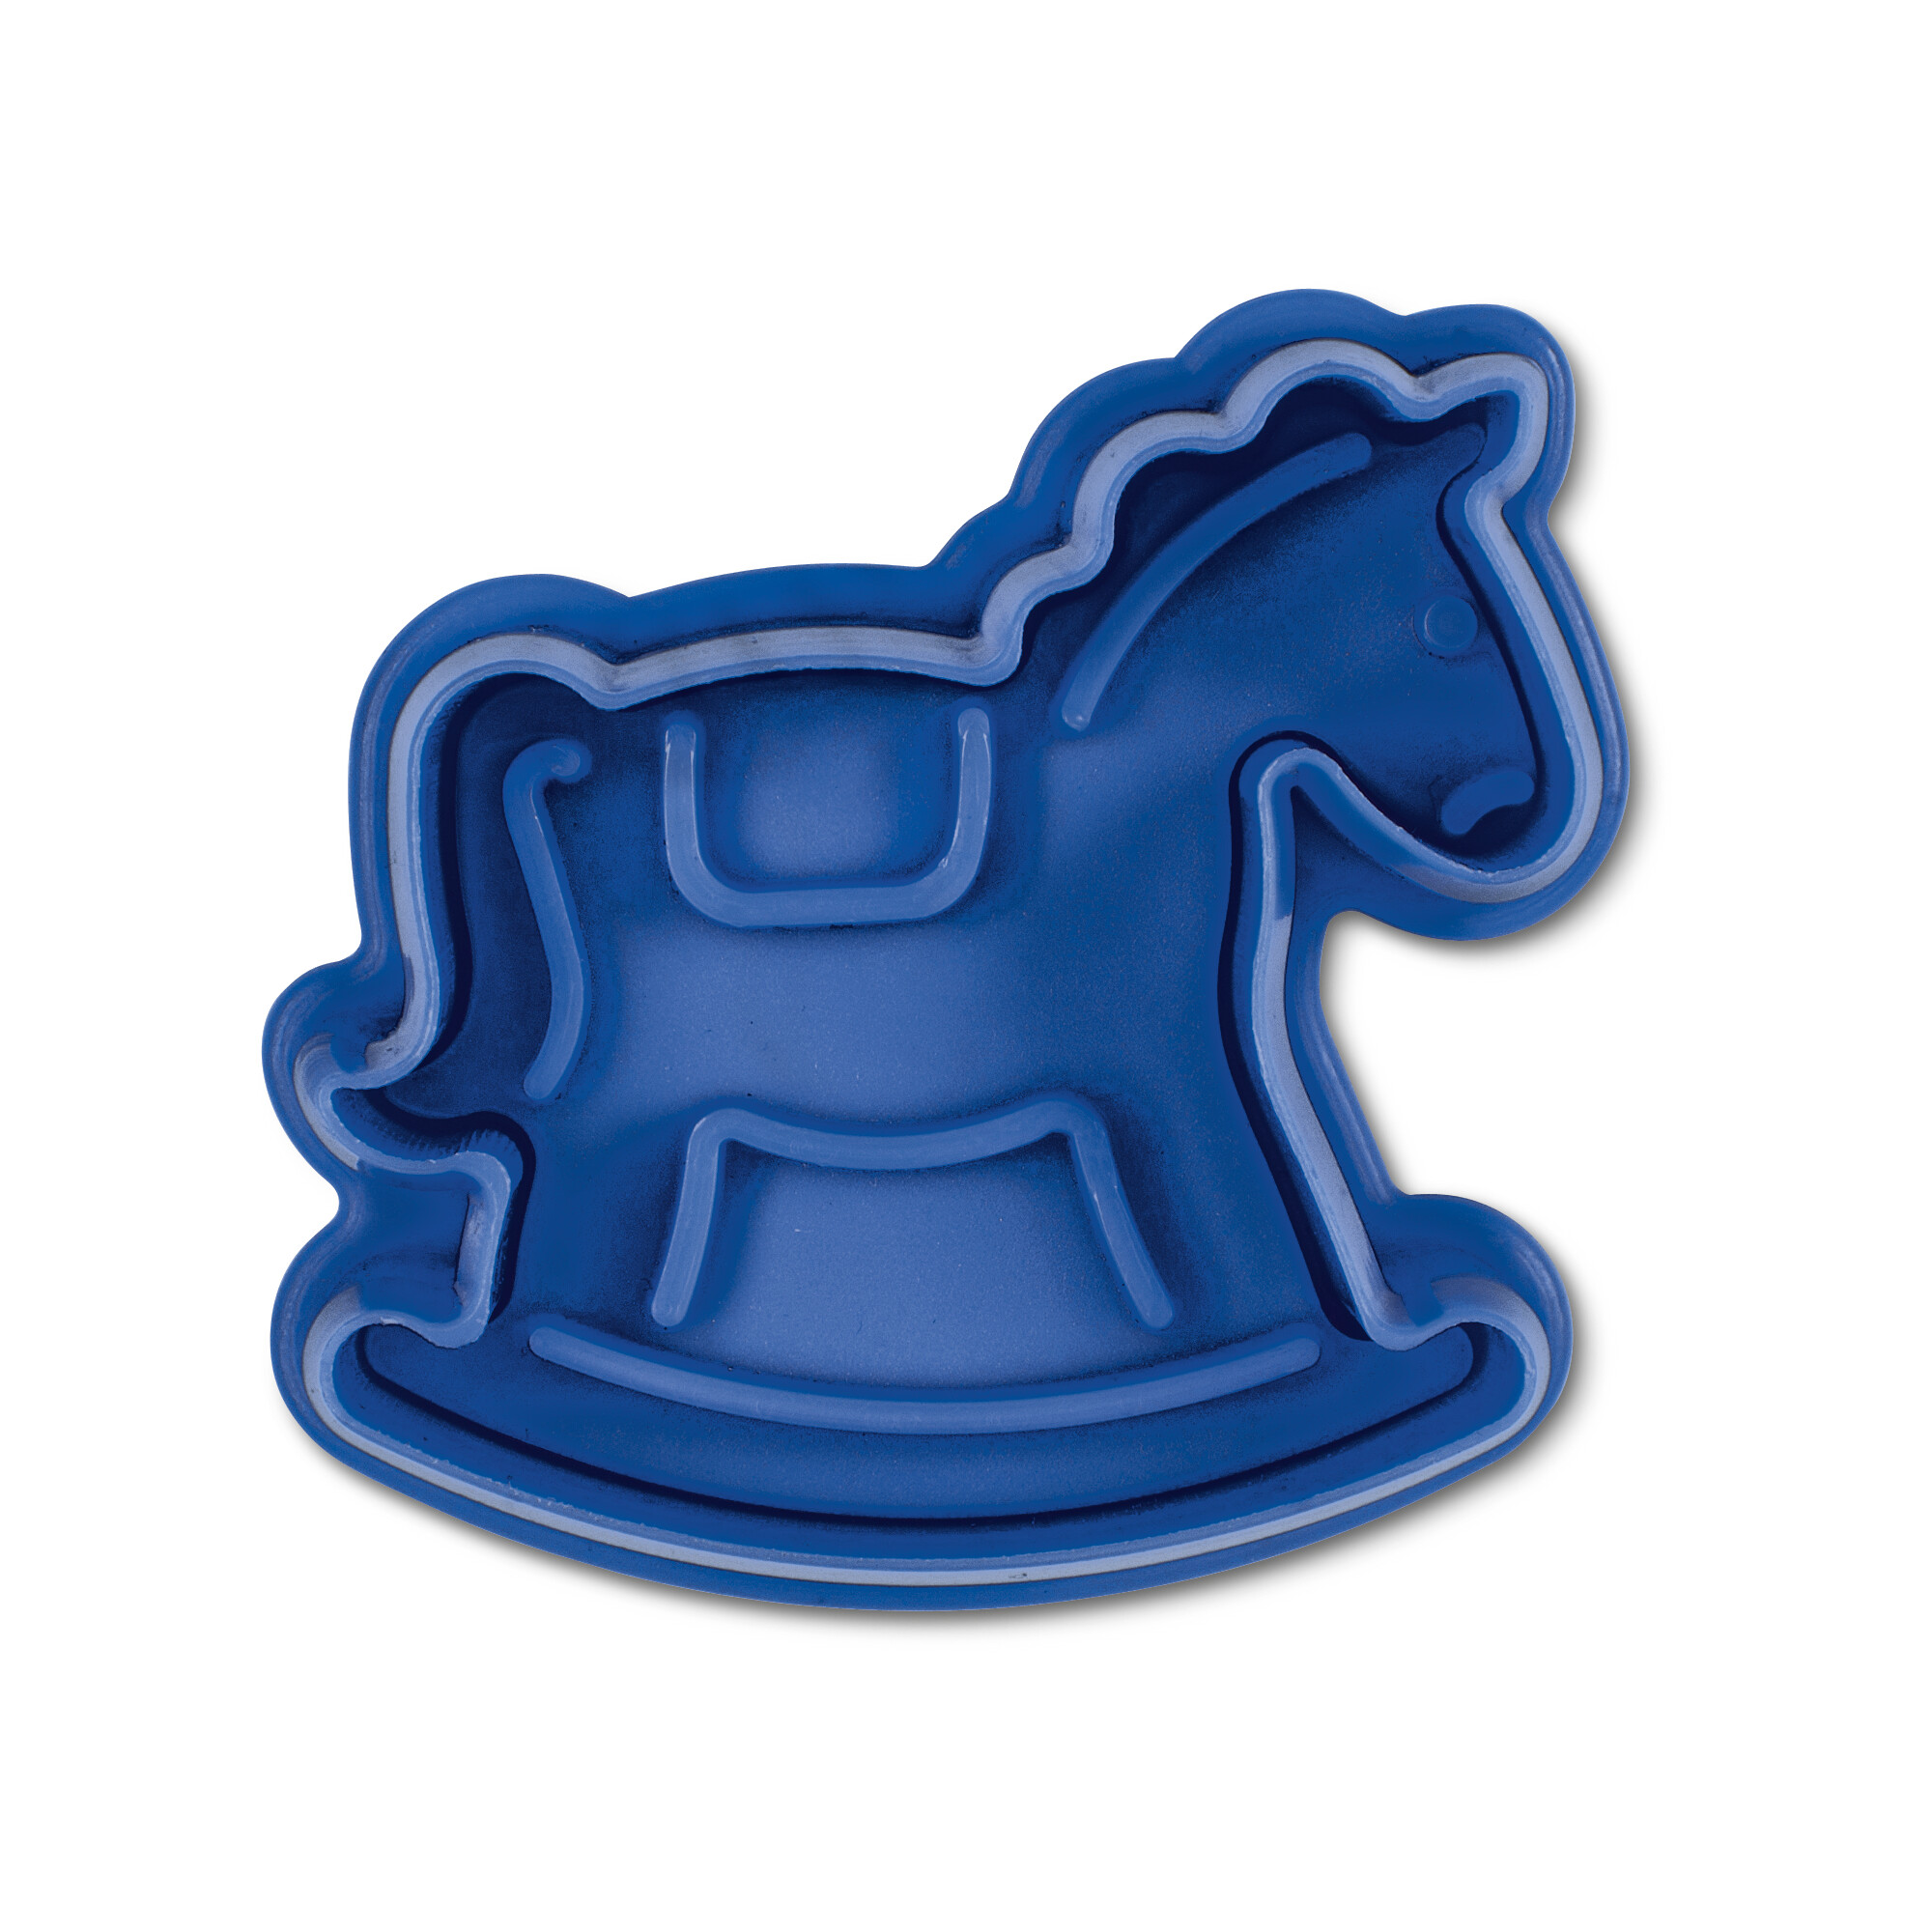 Cookie cutter with stamp and ejector – Rocking horse